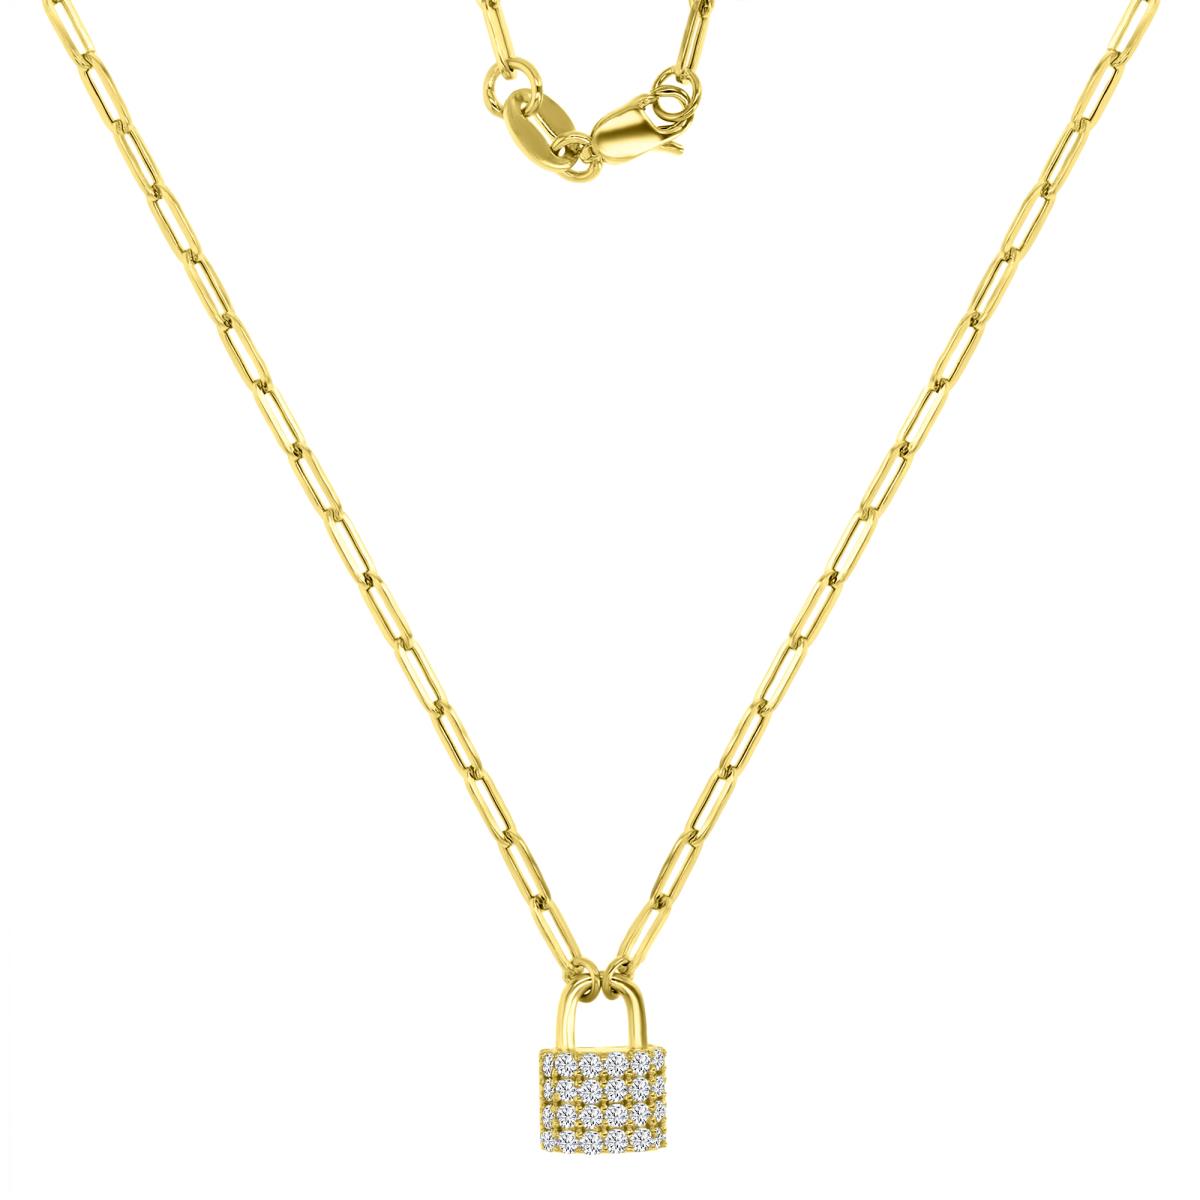 10K Yellow Gold 11X6MM Polished White CZ Lock & Paper Clip Link 18" Necklace